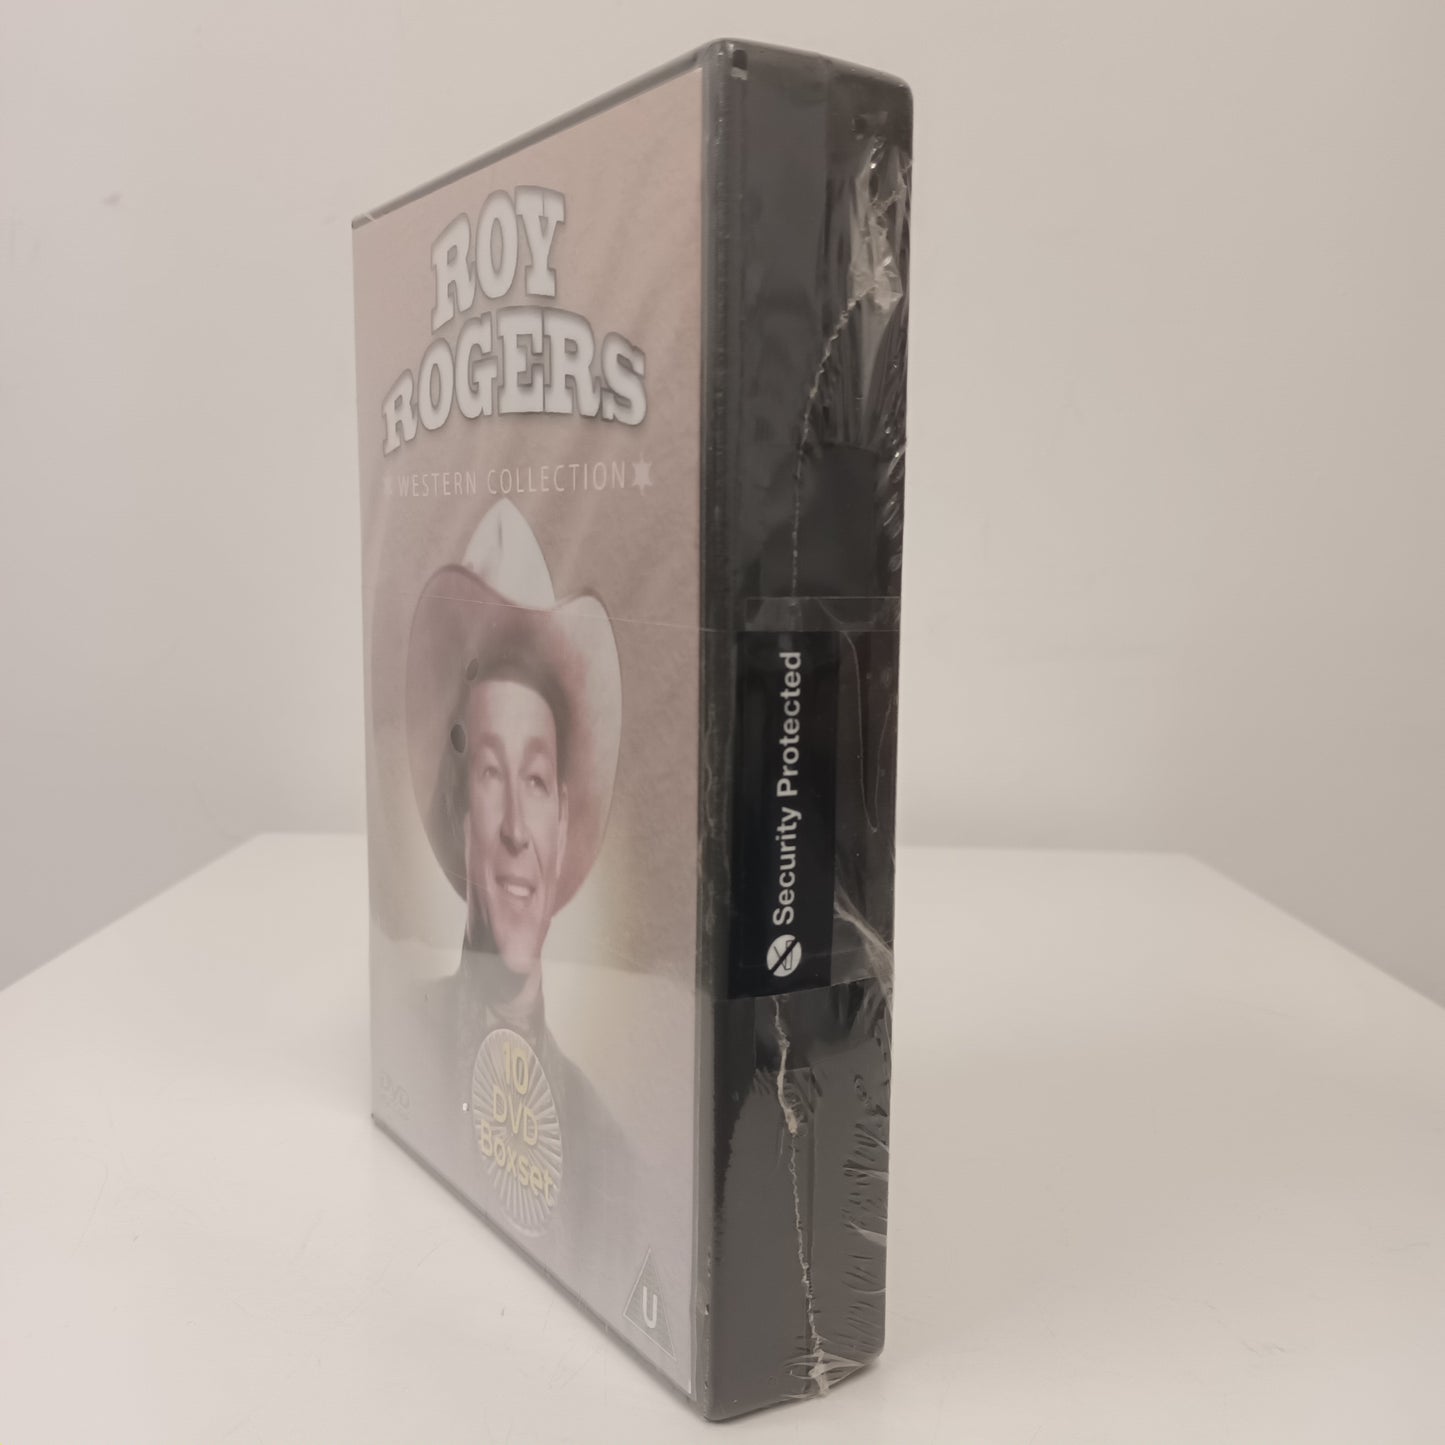 New Factory Sealed Roy Rogers Western Collection 10 DVD Boxset